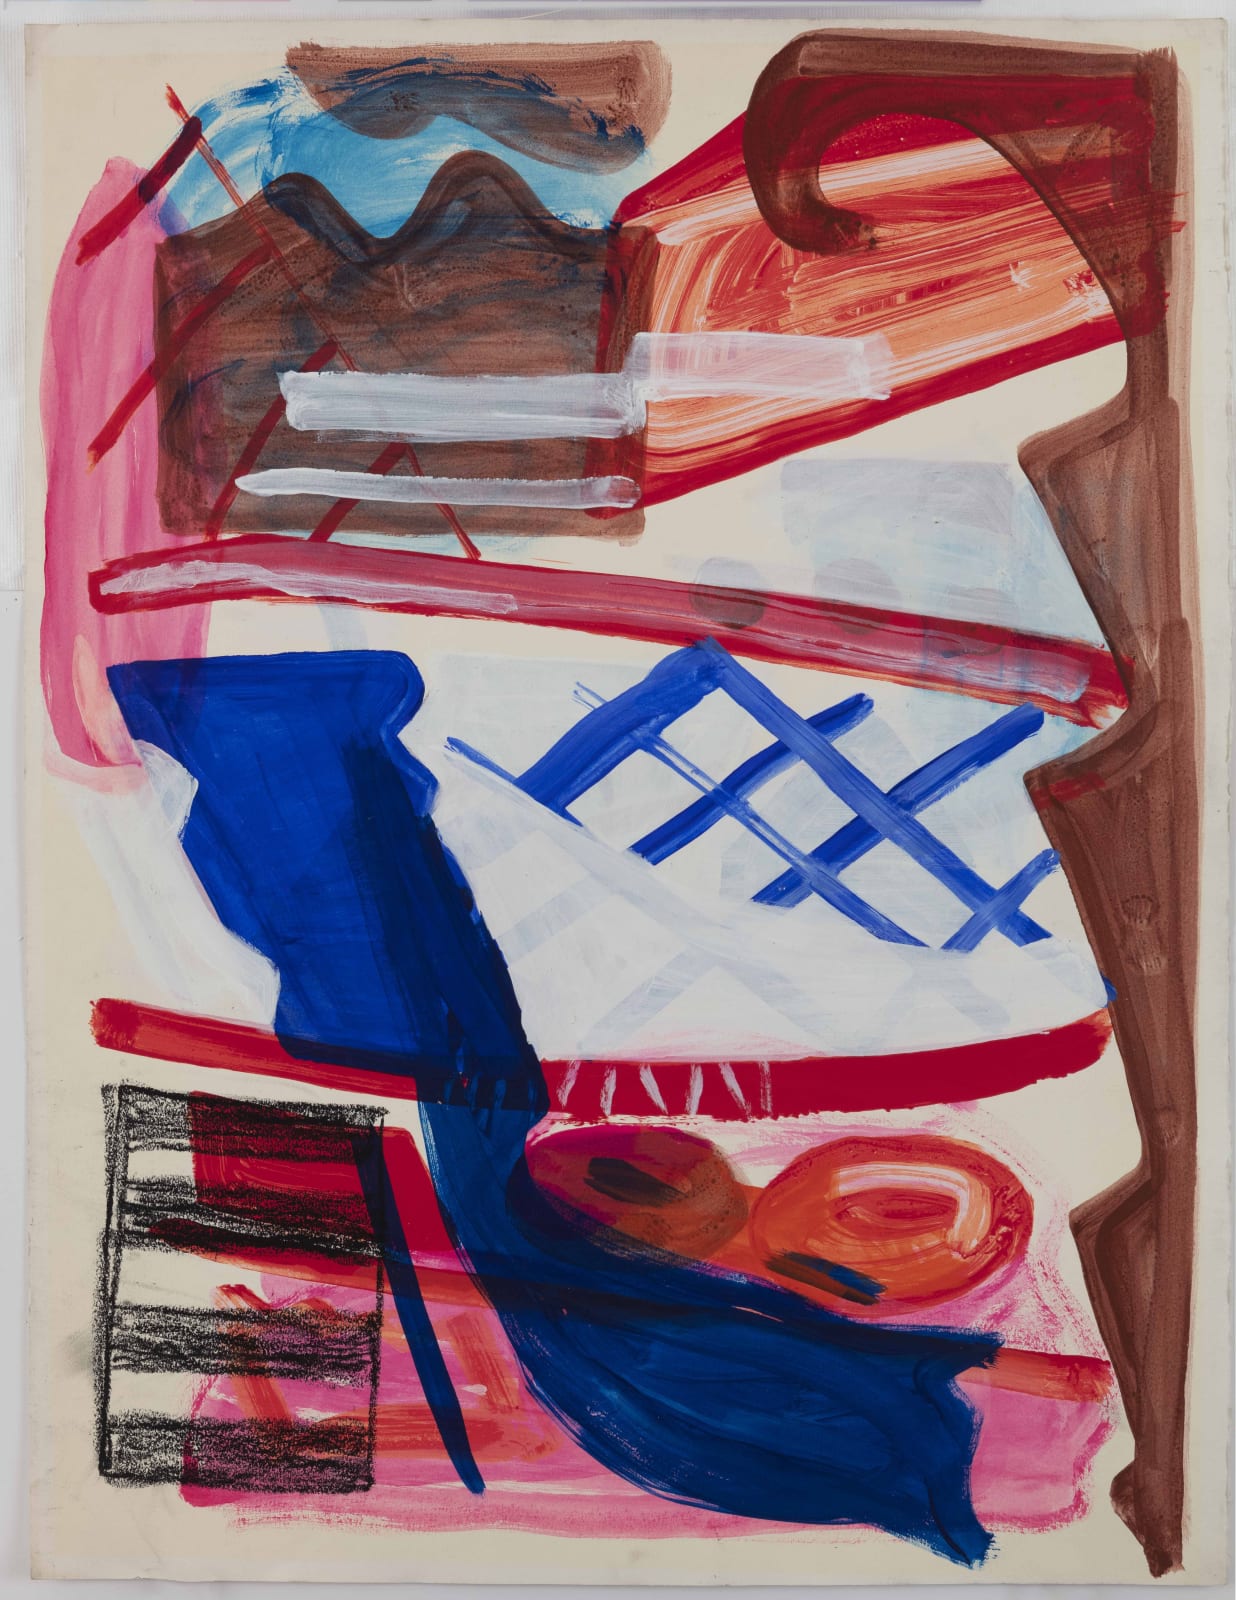 Shirley Jaffe Untitled, 1980 ca. Mixed media on paper 83,2 x 67 x 3,5 cm (32 3/4 x 26 3/8 x 1 3/8 in) framed